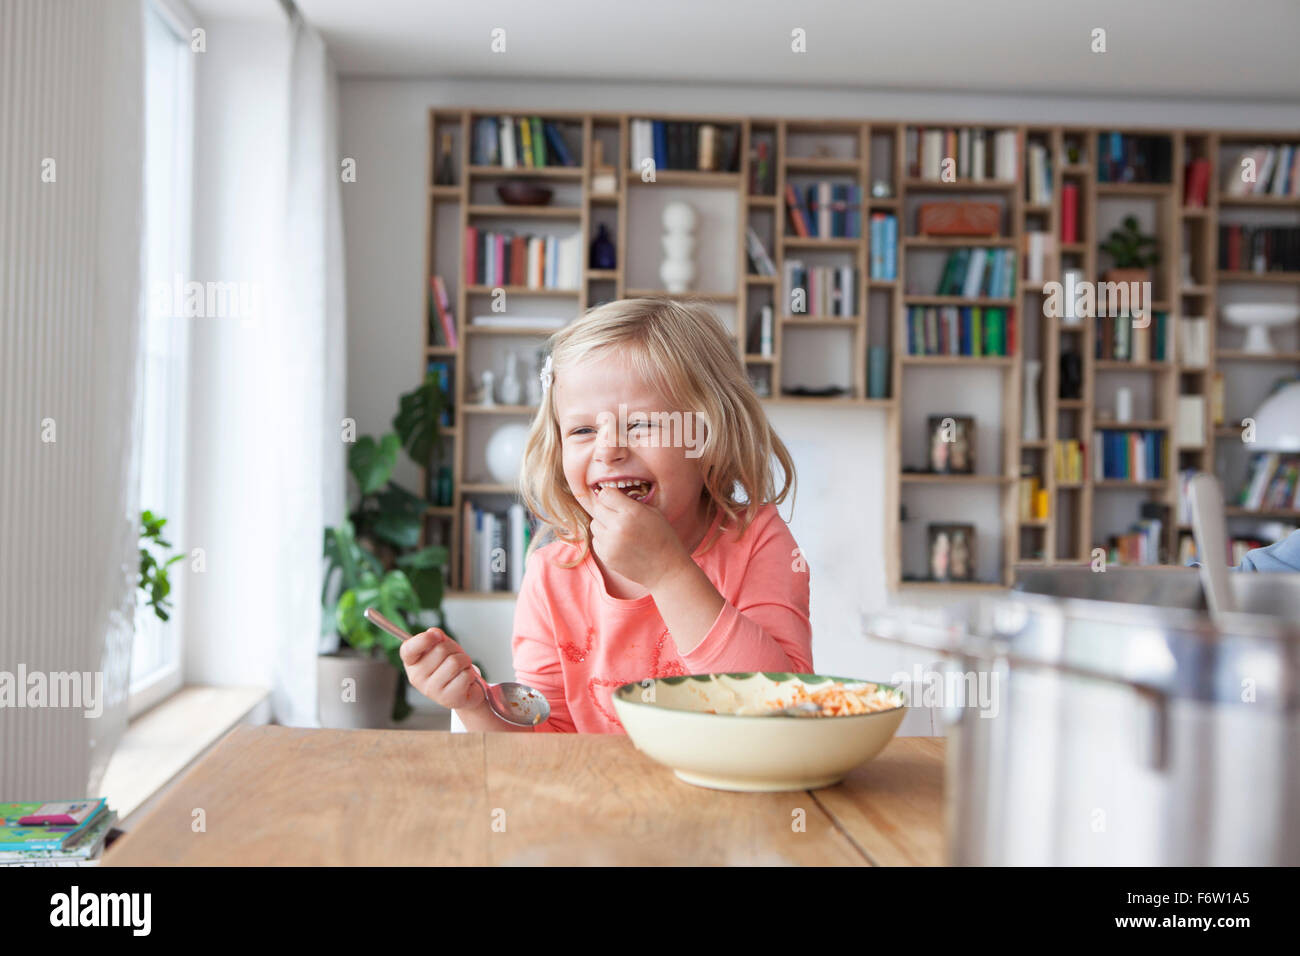 Portrait of laughing little girl eating spaghetti Banque D'Images